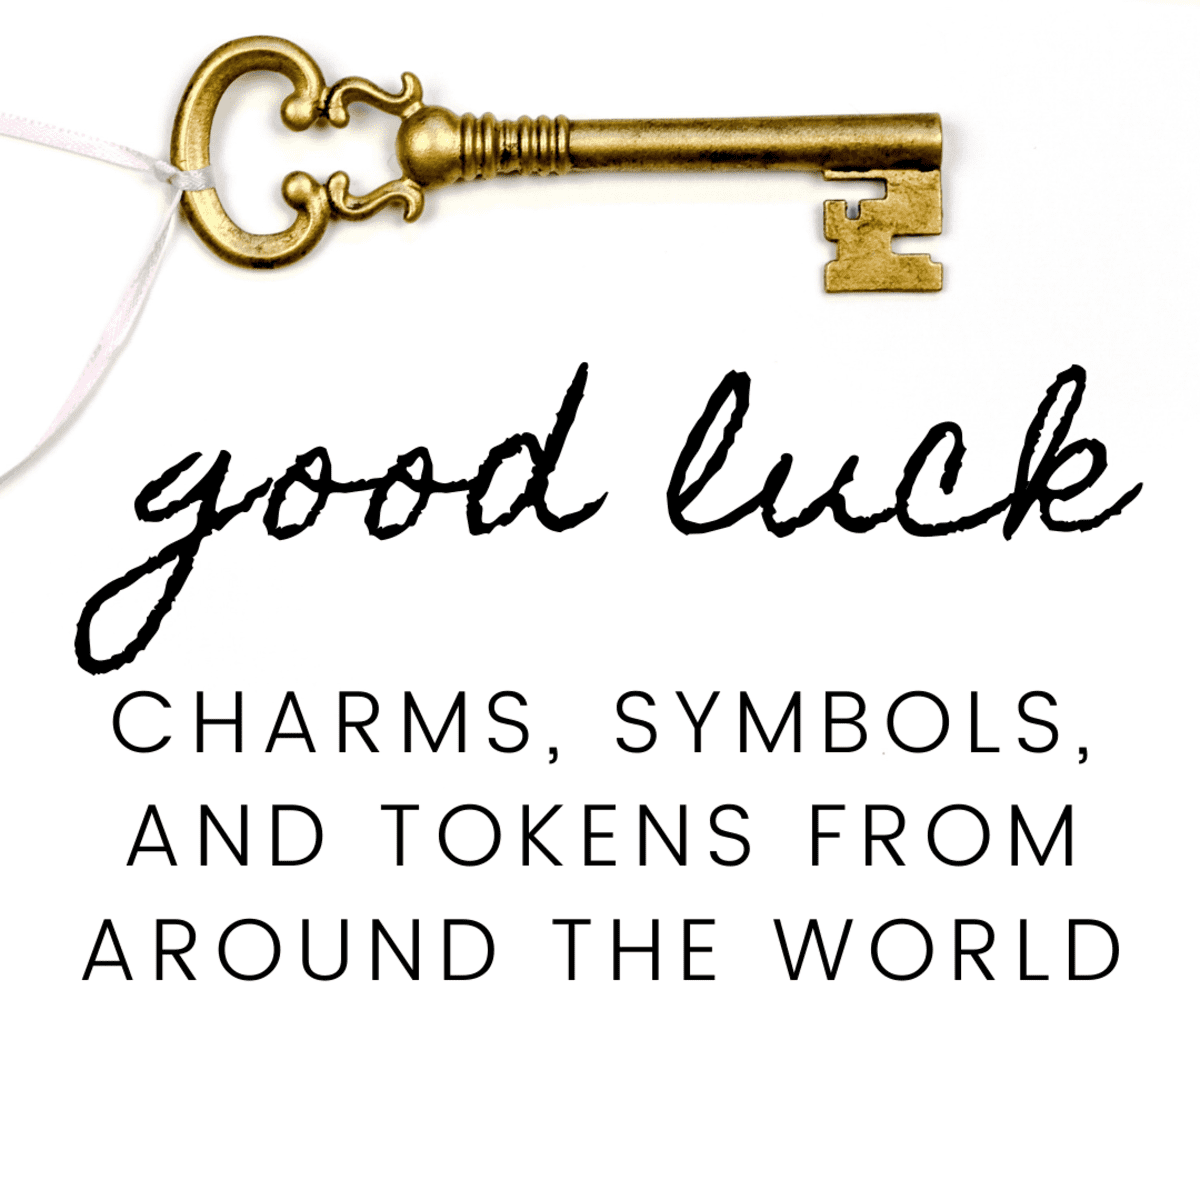 50 Good Luck Symbols and Signs From Around the World - Exemplore